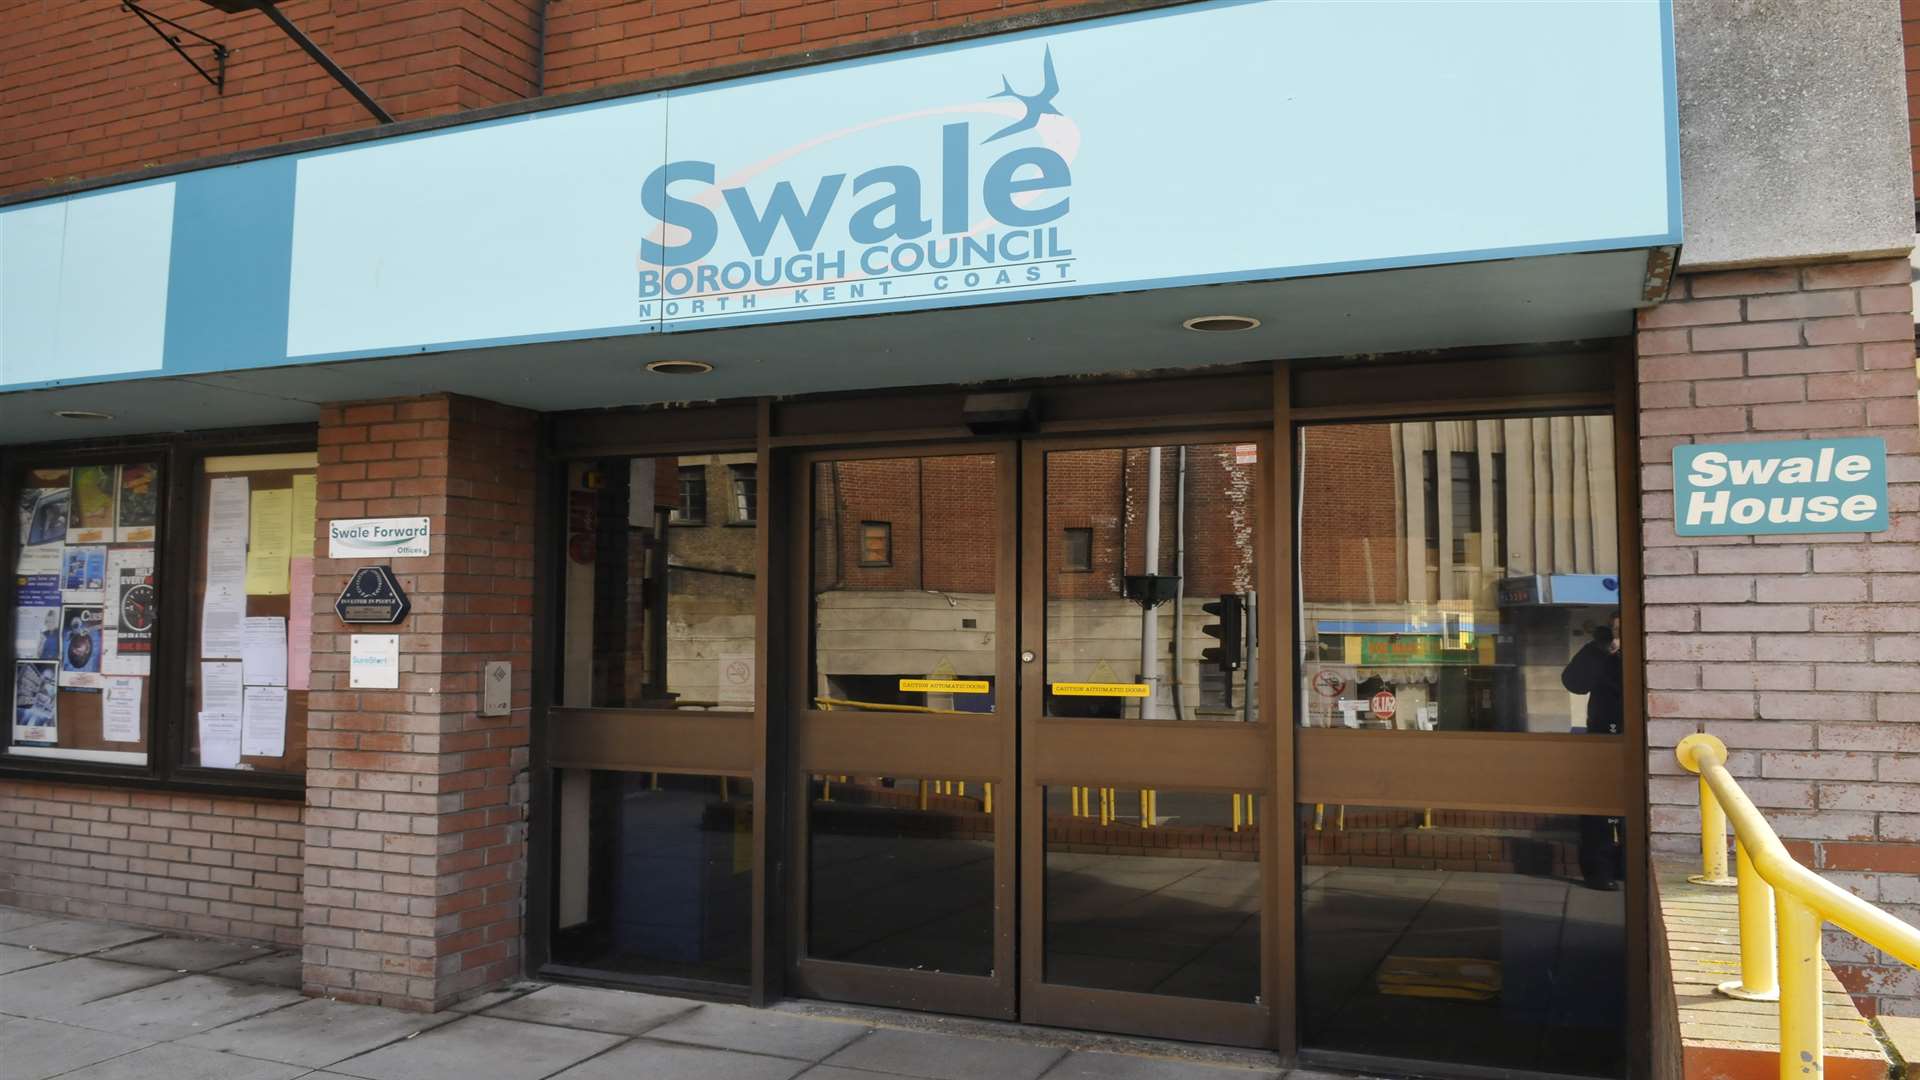 Swale council headquarters in East Street, Sittingbourne. Stock picture.